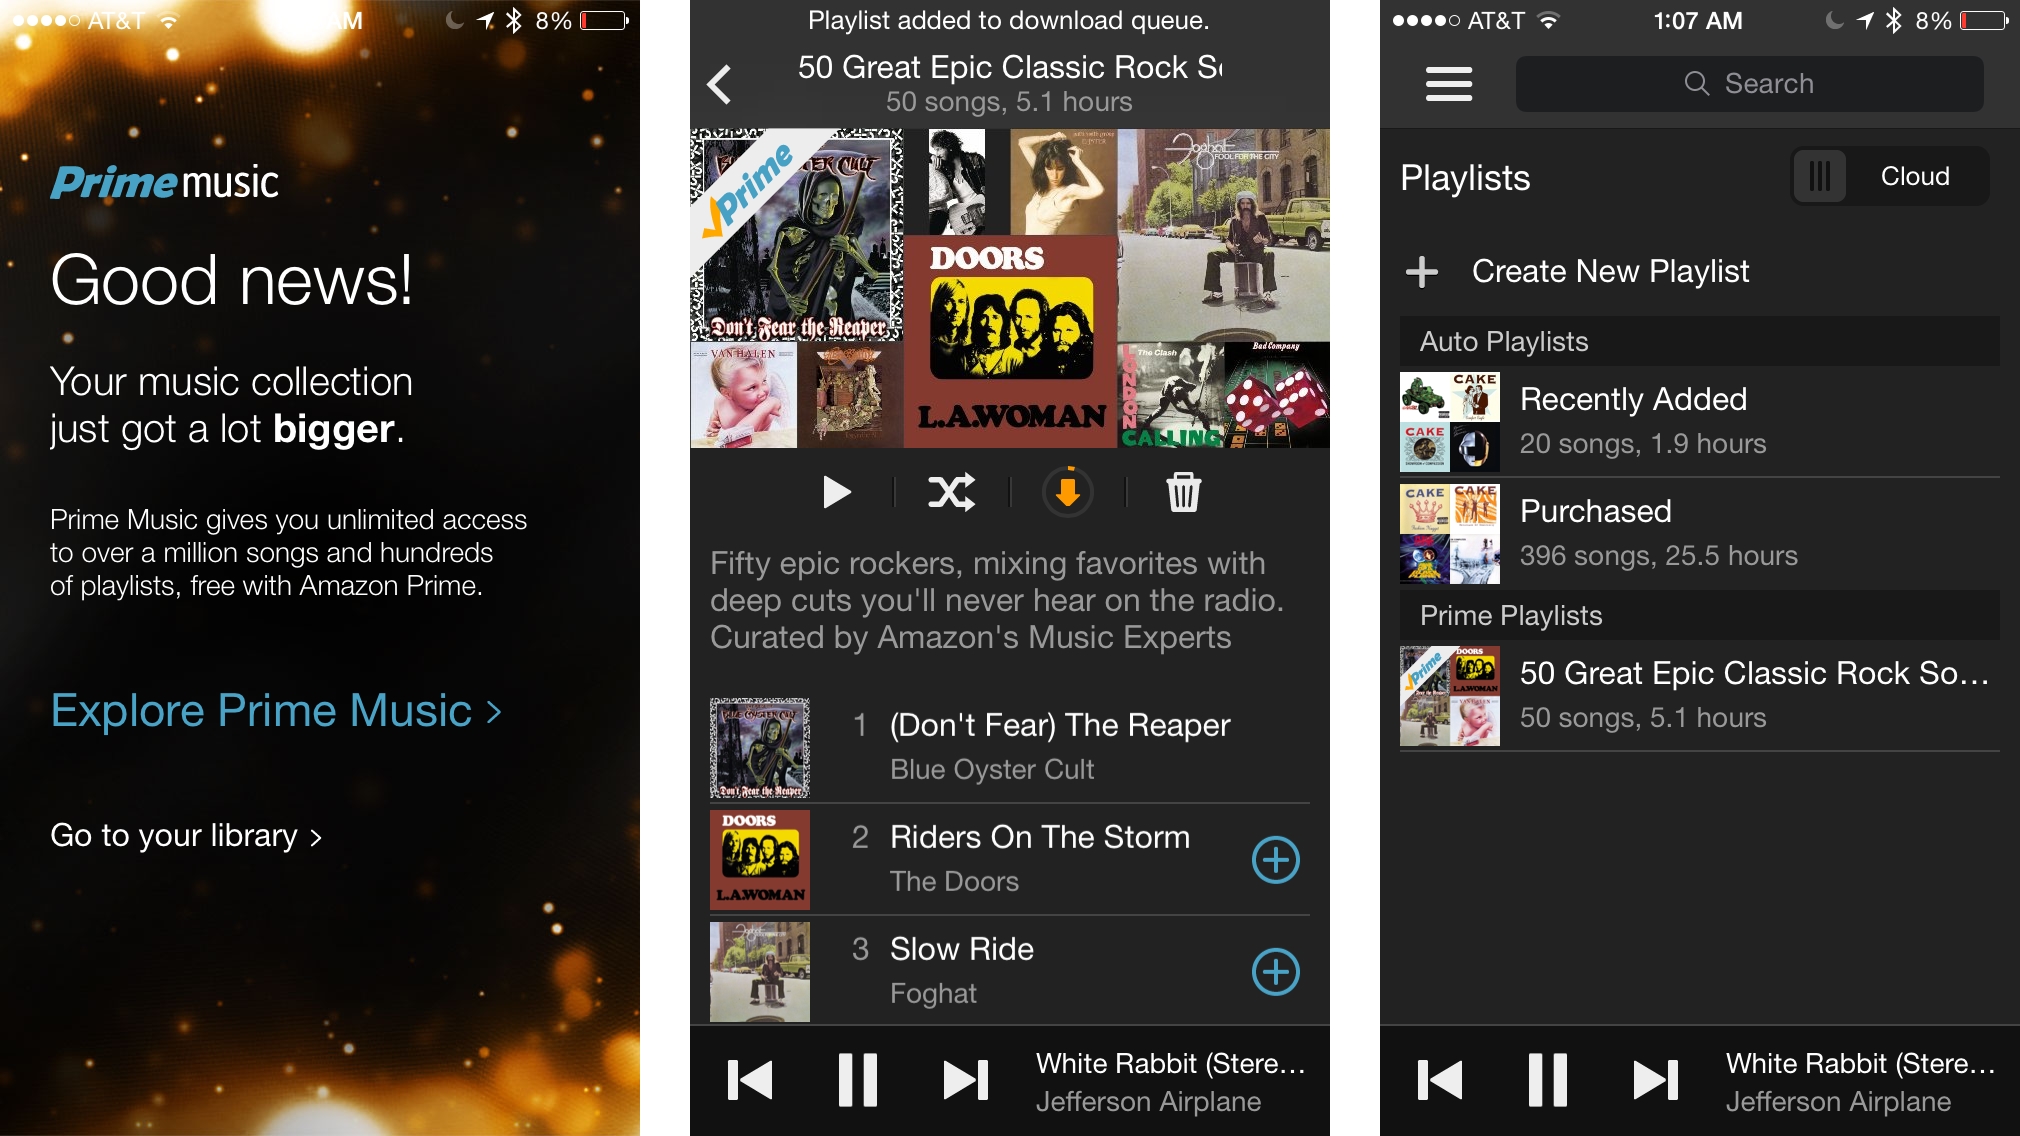 Amazon Prime Music Now has a Mobile App too